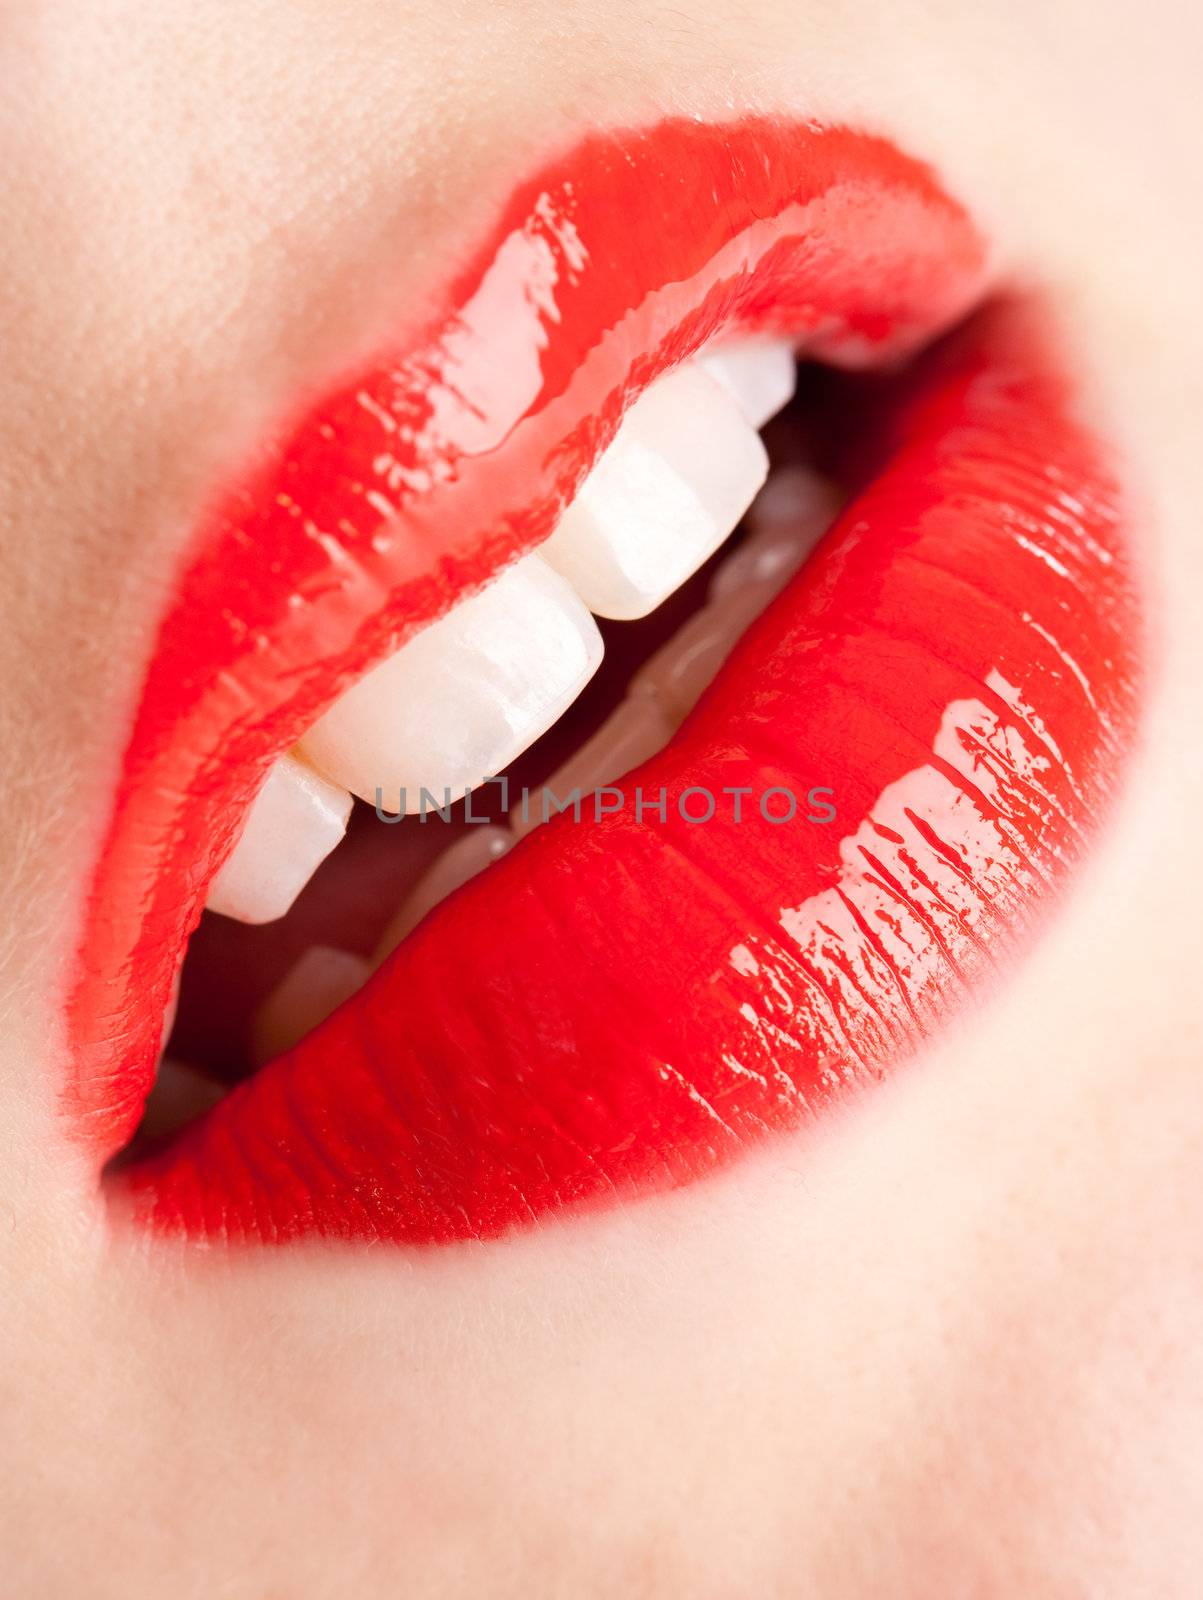 Female mouth with bright shiny red lipstick